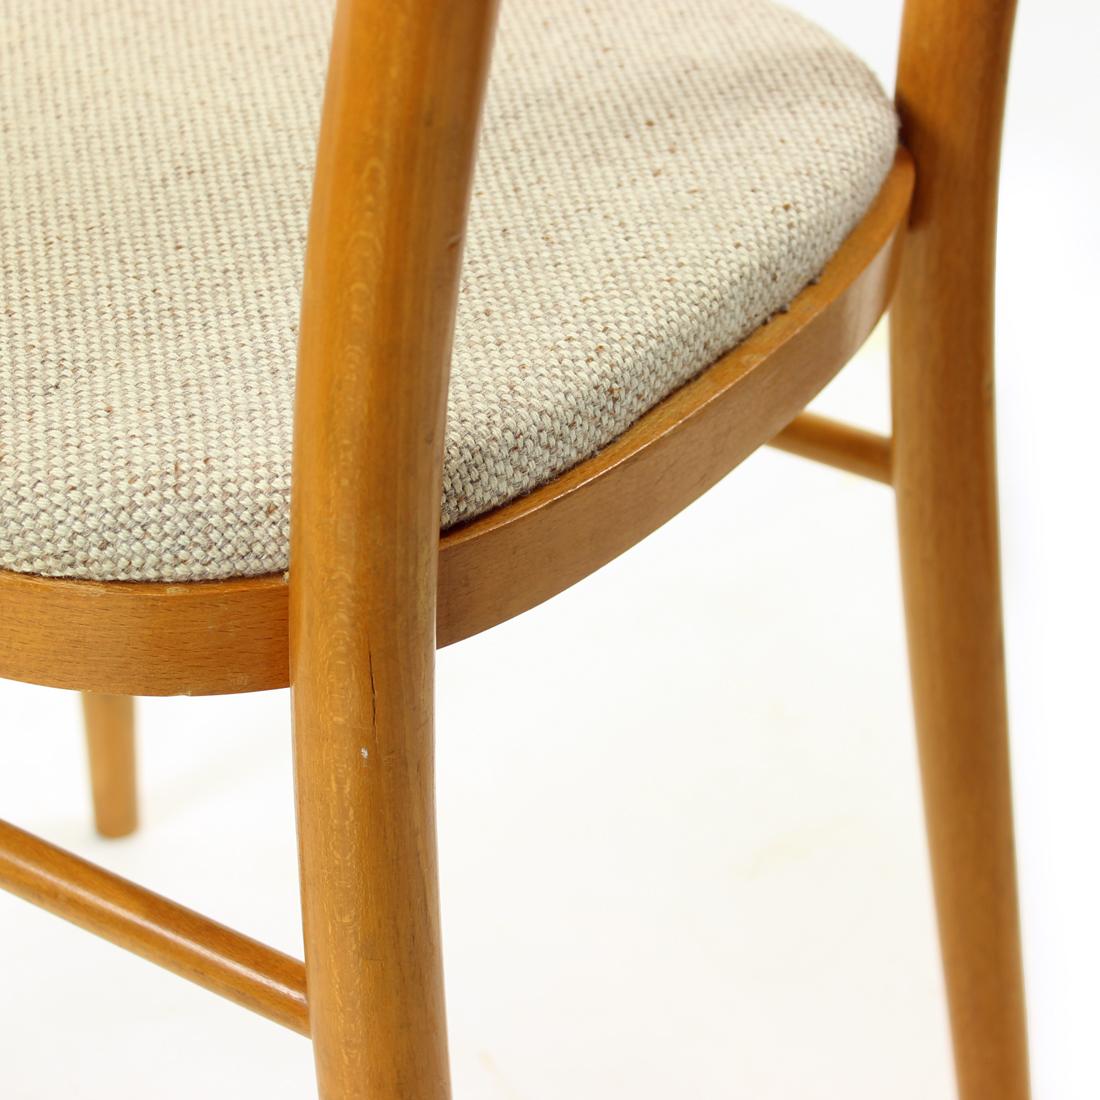 Midcentury Chair in Blond Wood, Czechoslovakia, 1960s For Sale 4